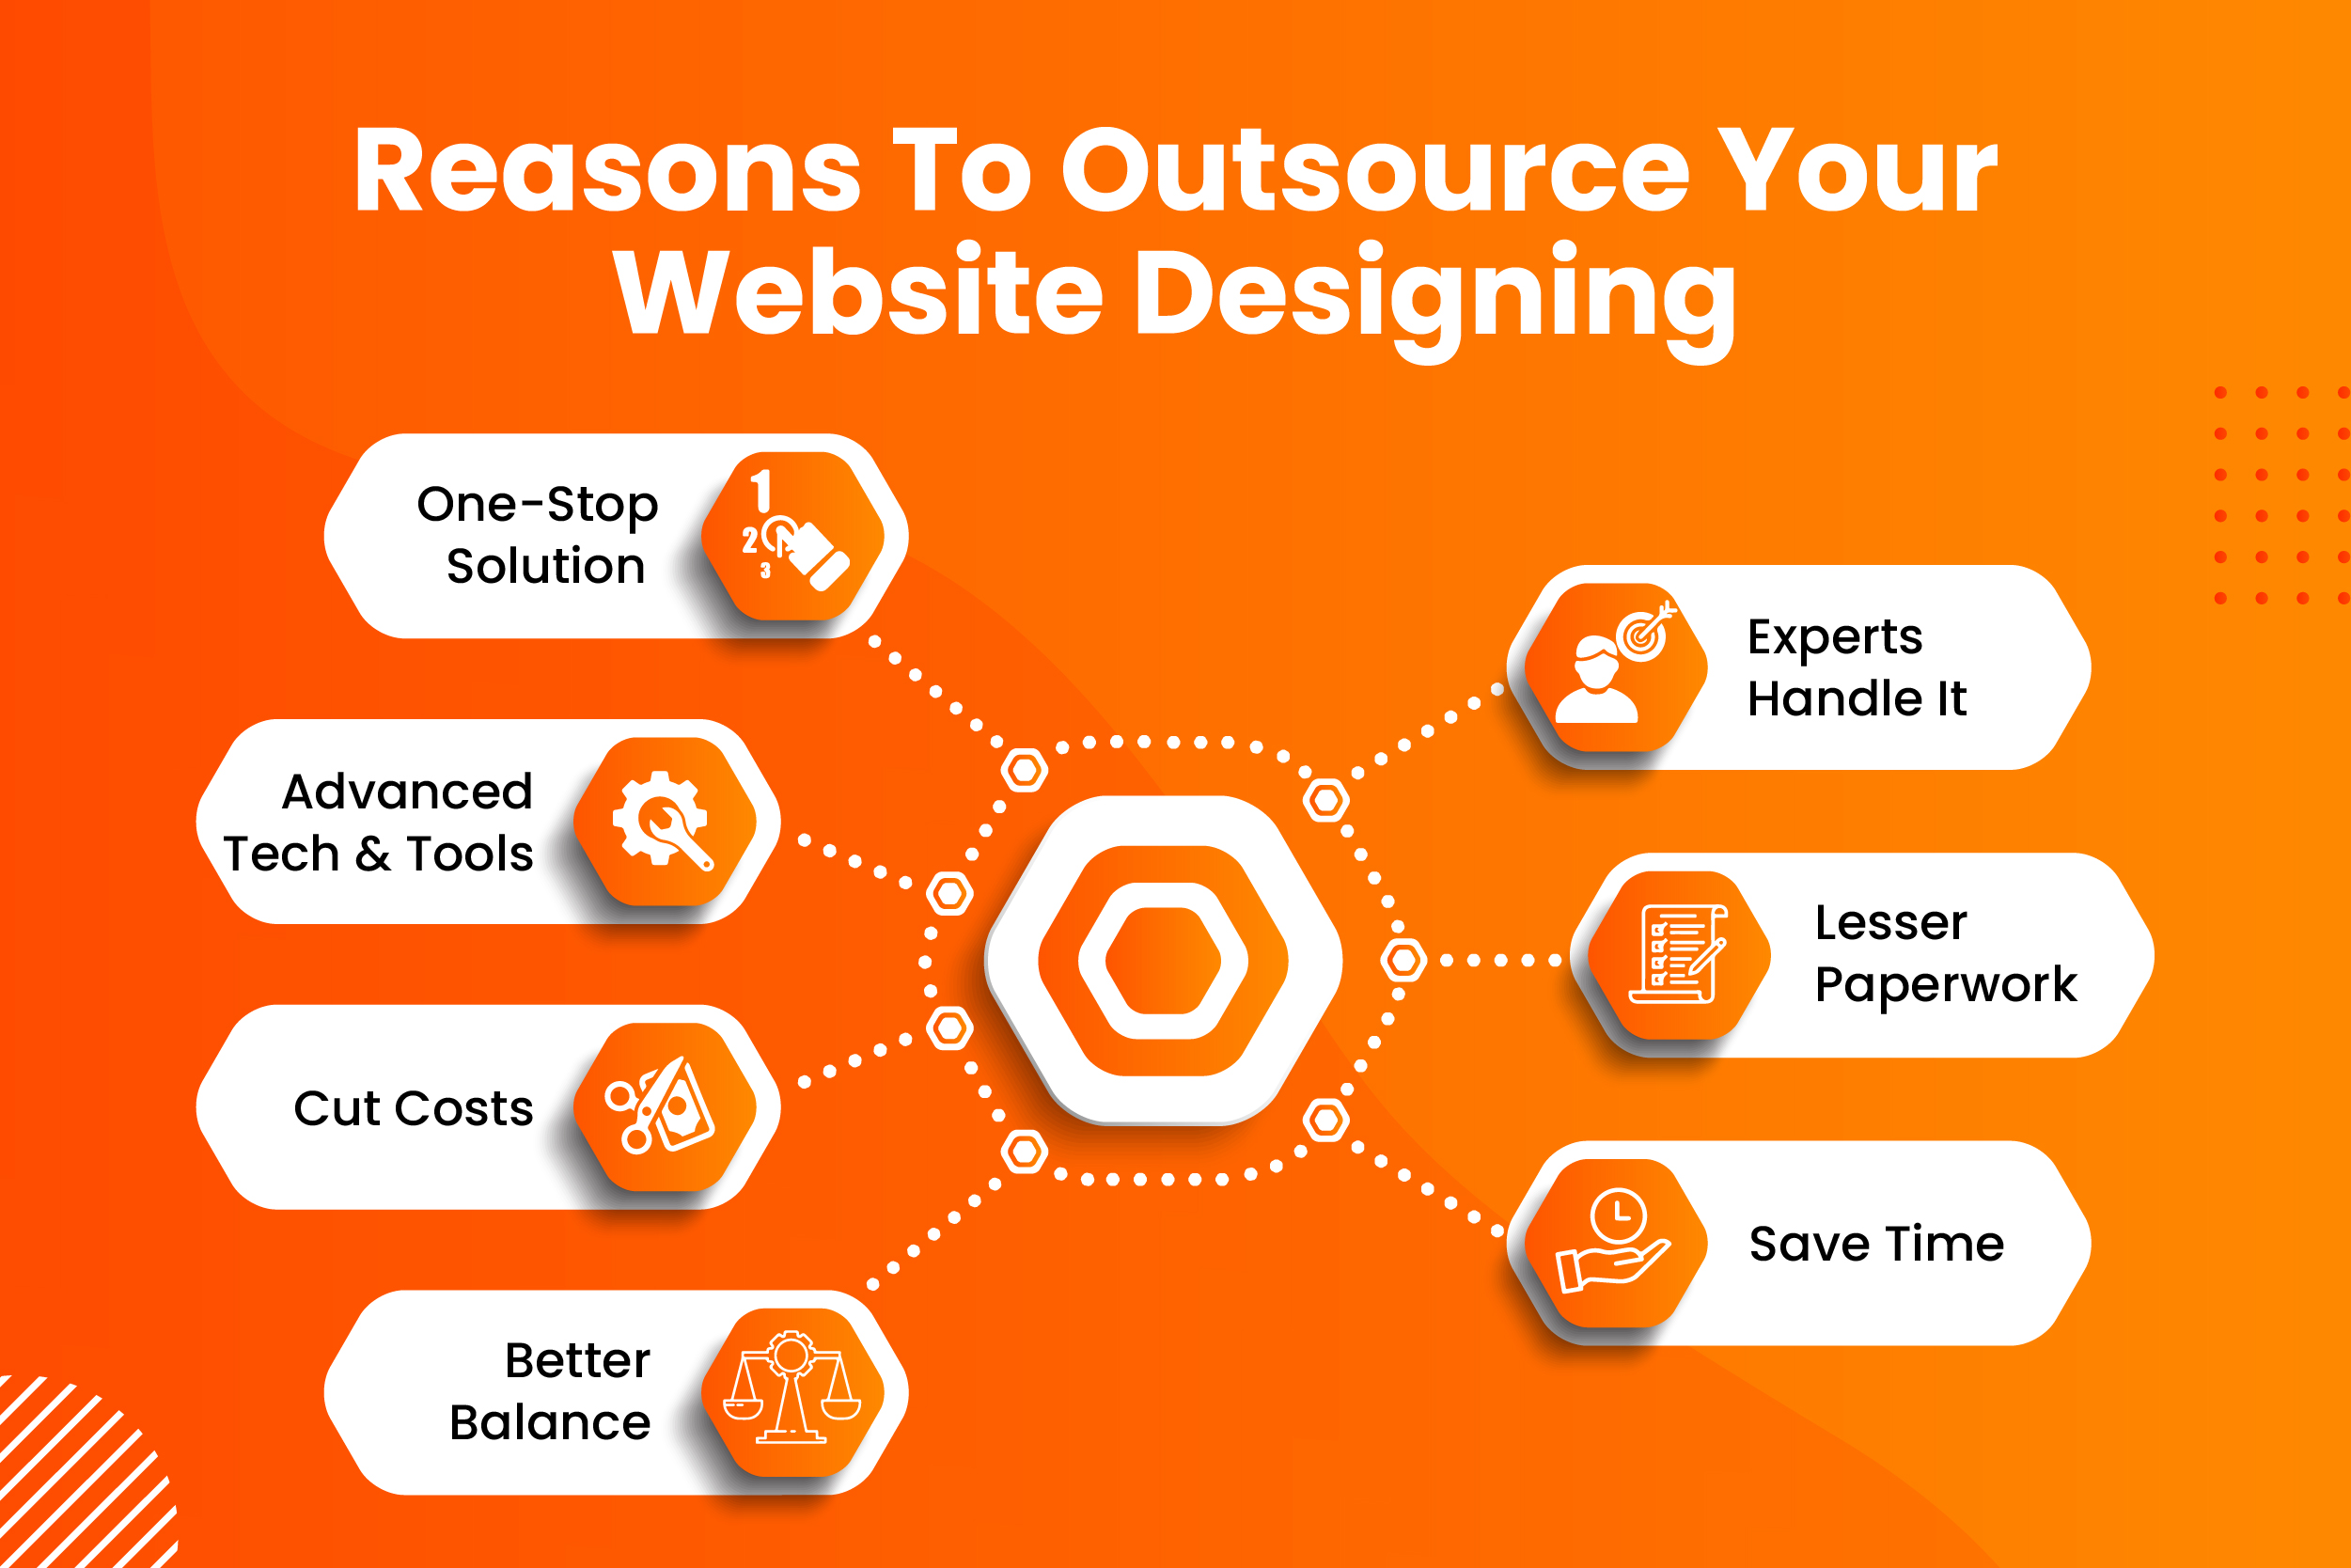 Images 20 - Why Should You Outsource Your Website Designing?